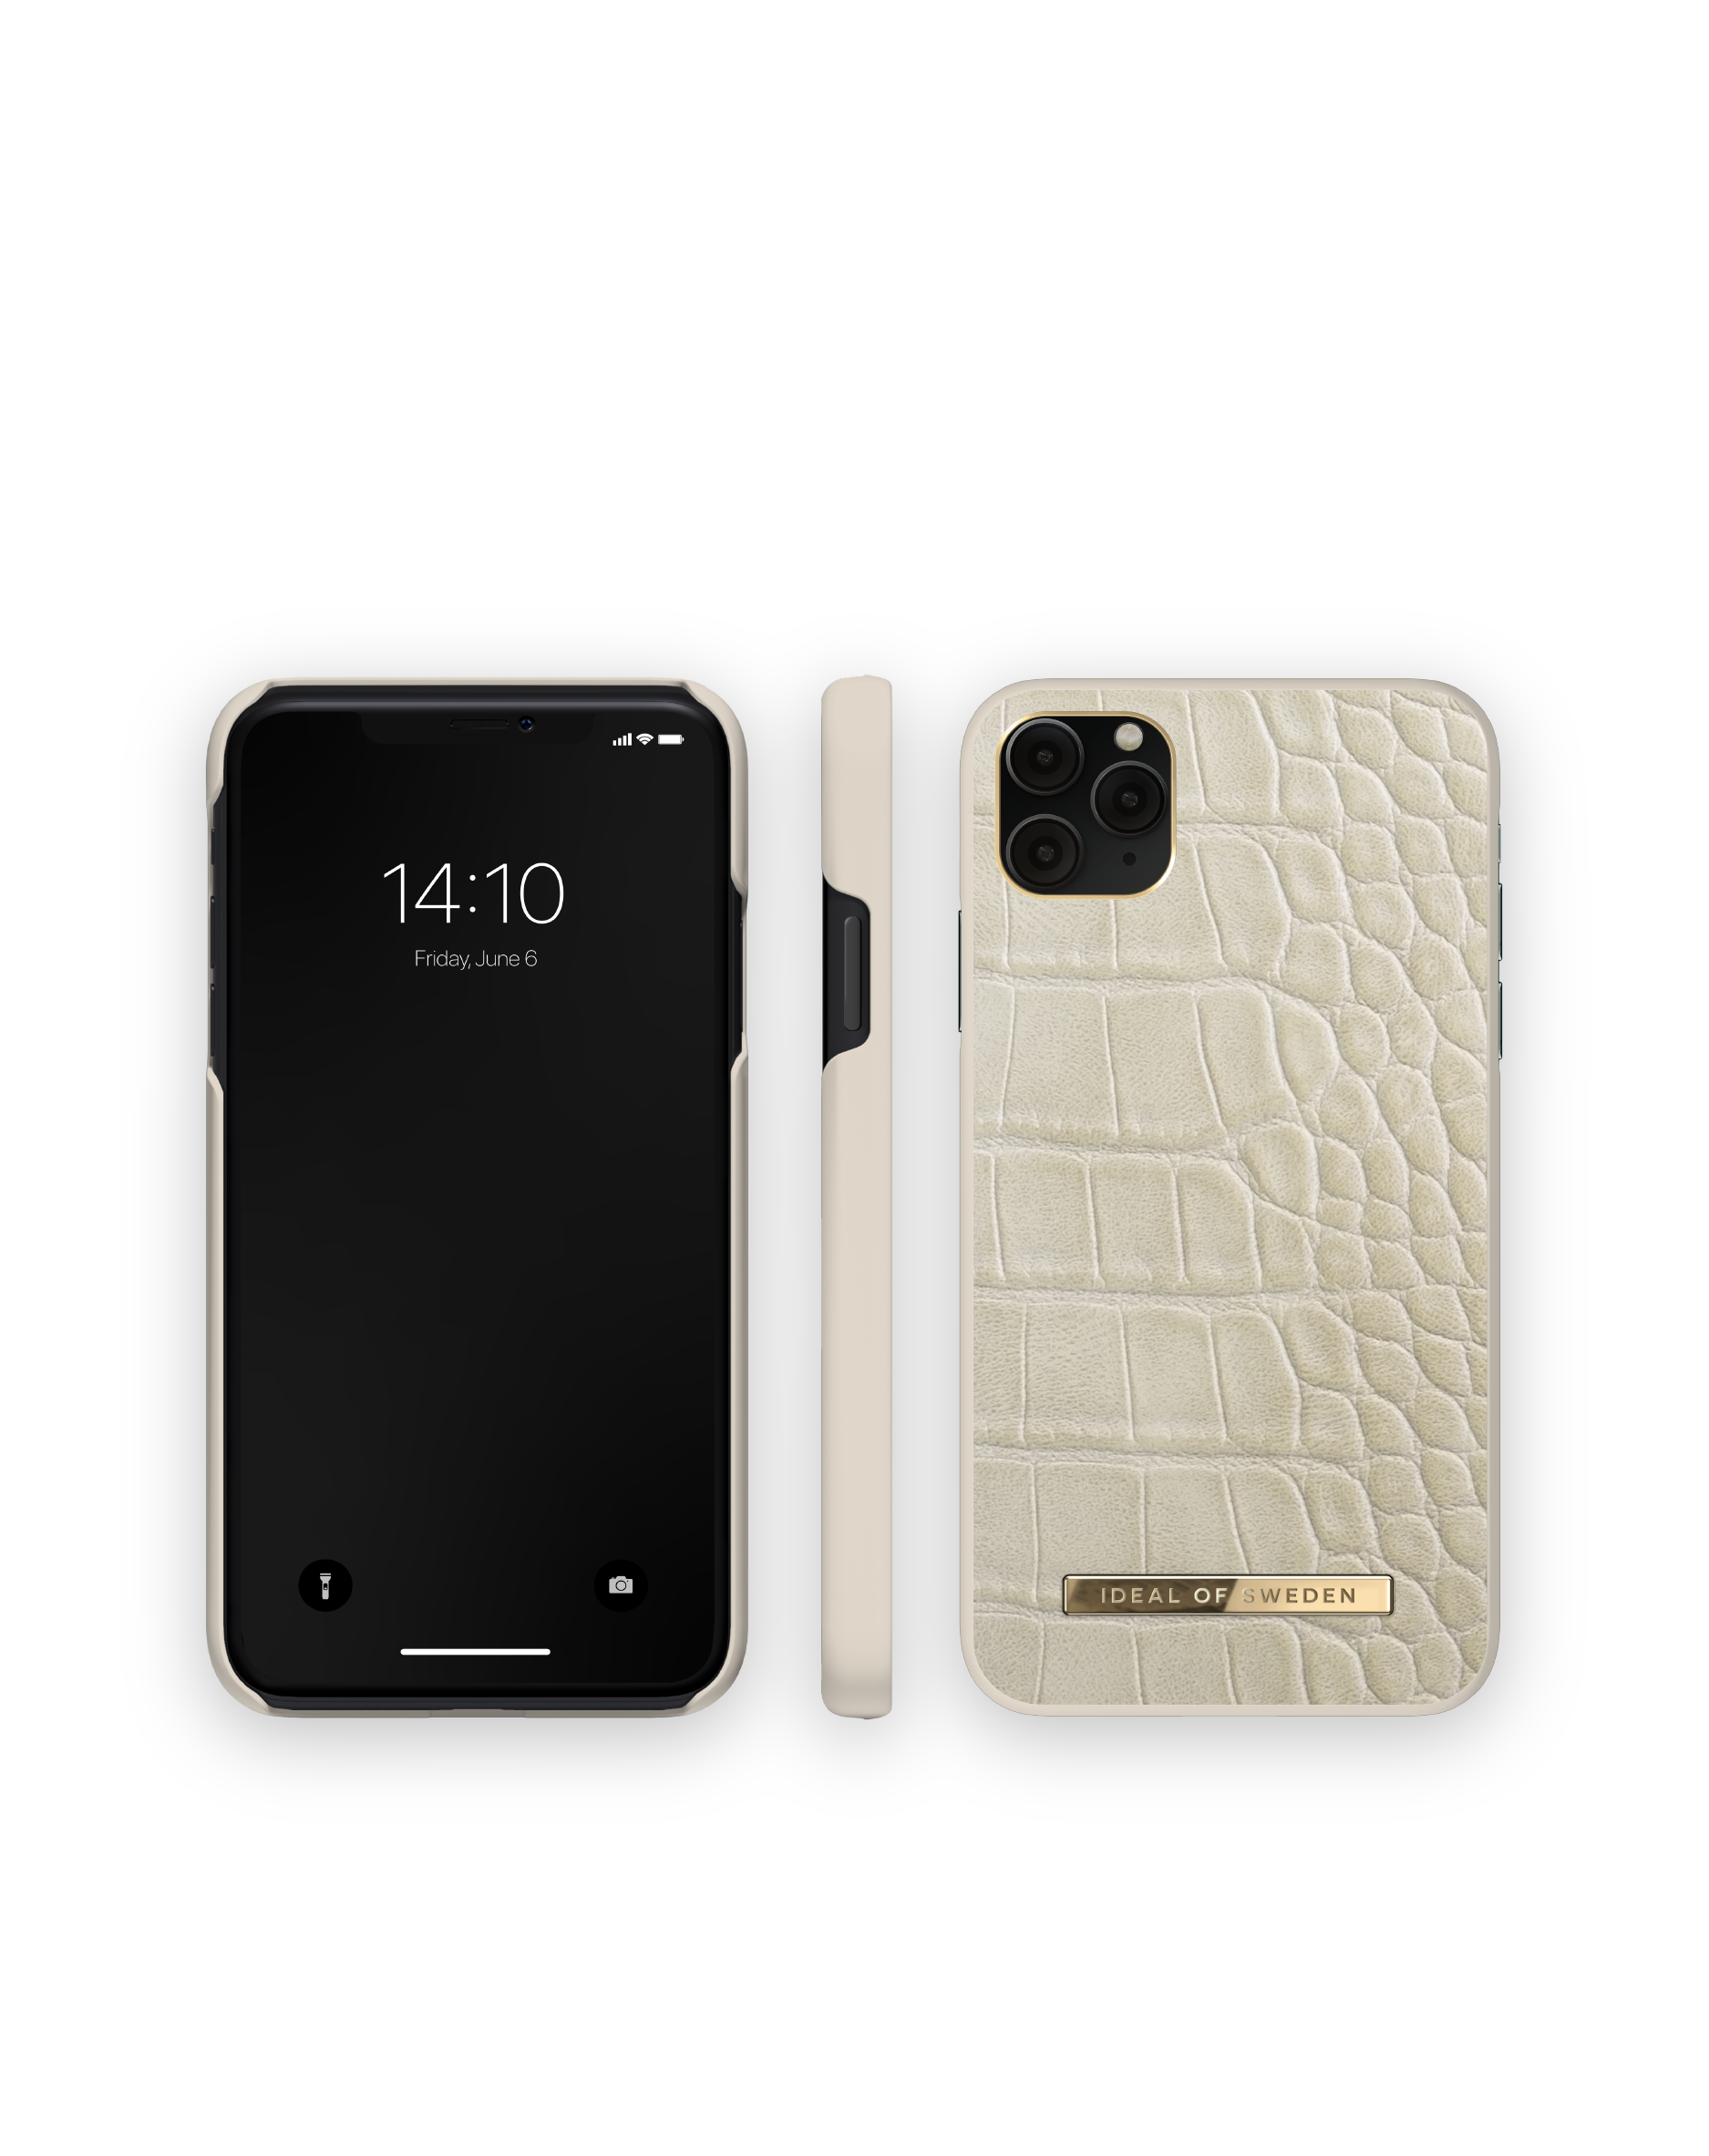 Caramel Apple Max, SWEDEN OF Apple Pro Backcover, iPhone IDACAW20-1965-243, XS Croco IDEAL iPhone 11 Max, Apple,